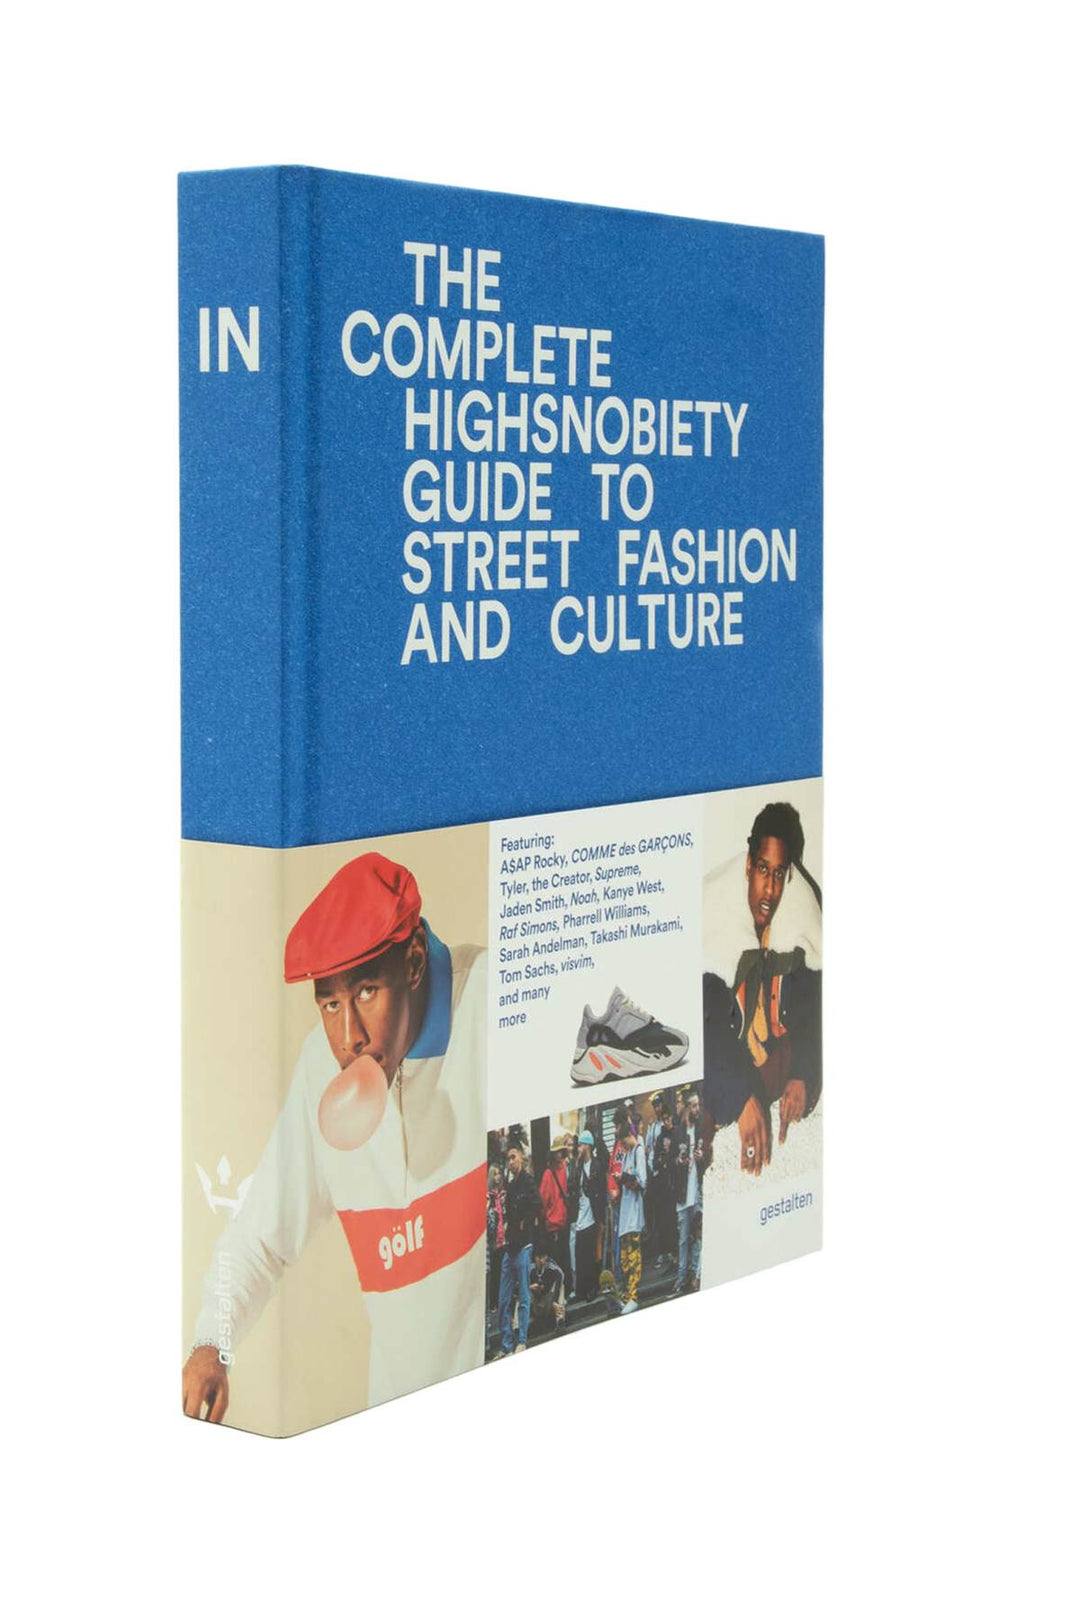 New mags the incomplete – highsnobiety guide to street fashion and culture-1